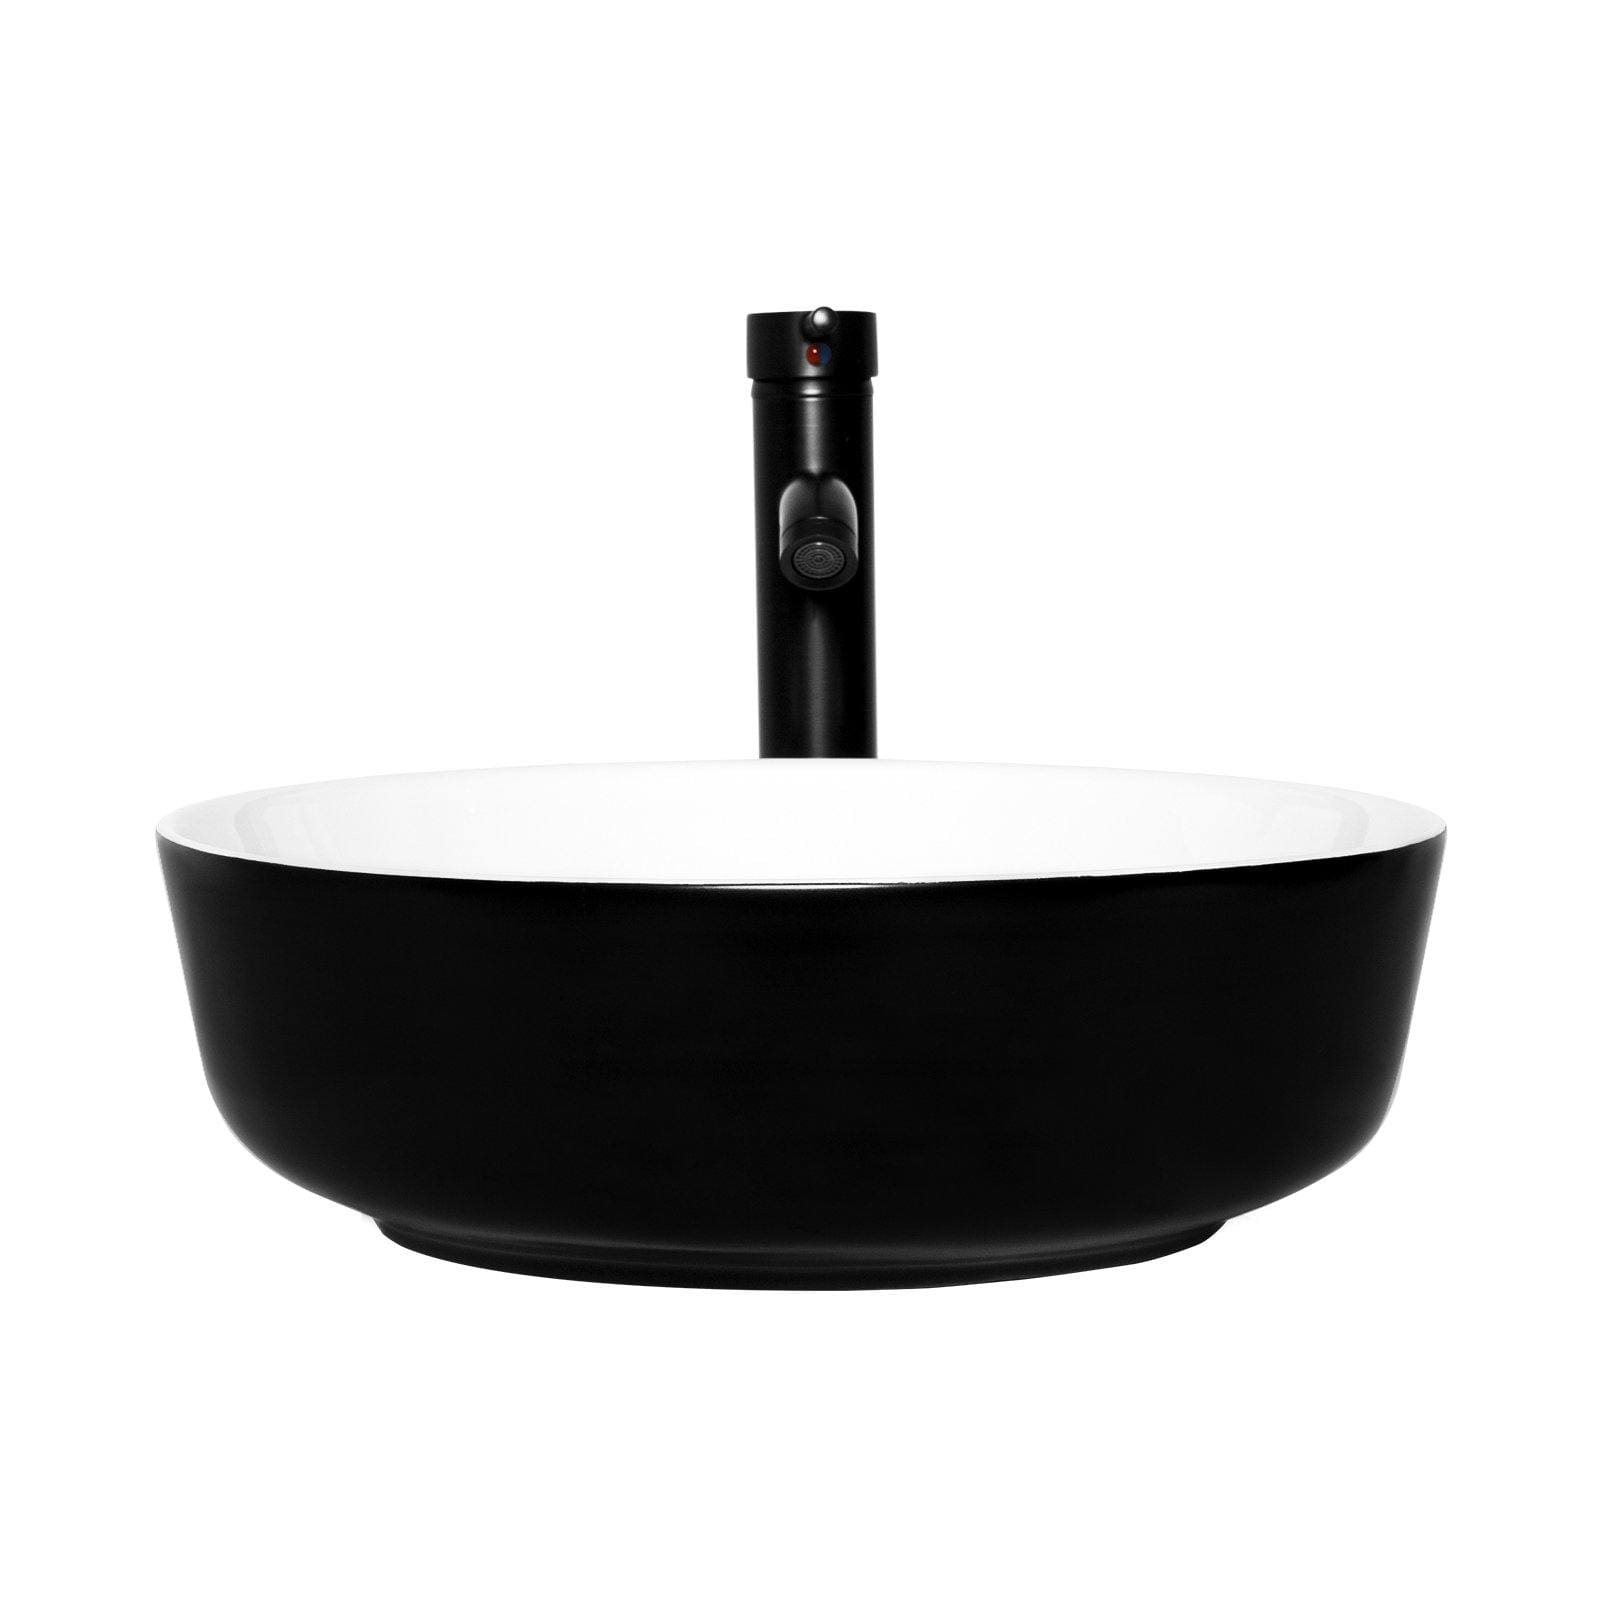 Elecwish Vessel Sinks Ceramic Bathroom Sink with Faucet Drain Combo,Round Black and White